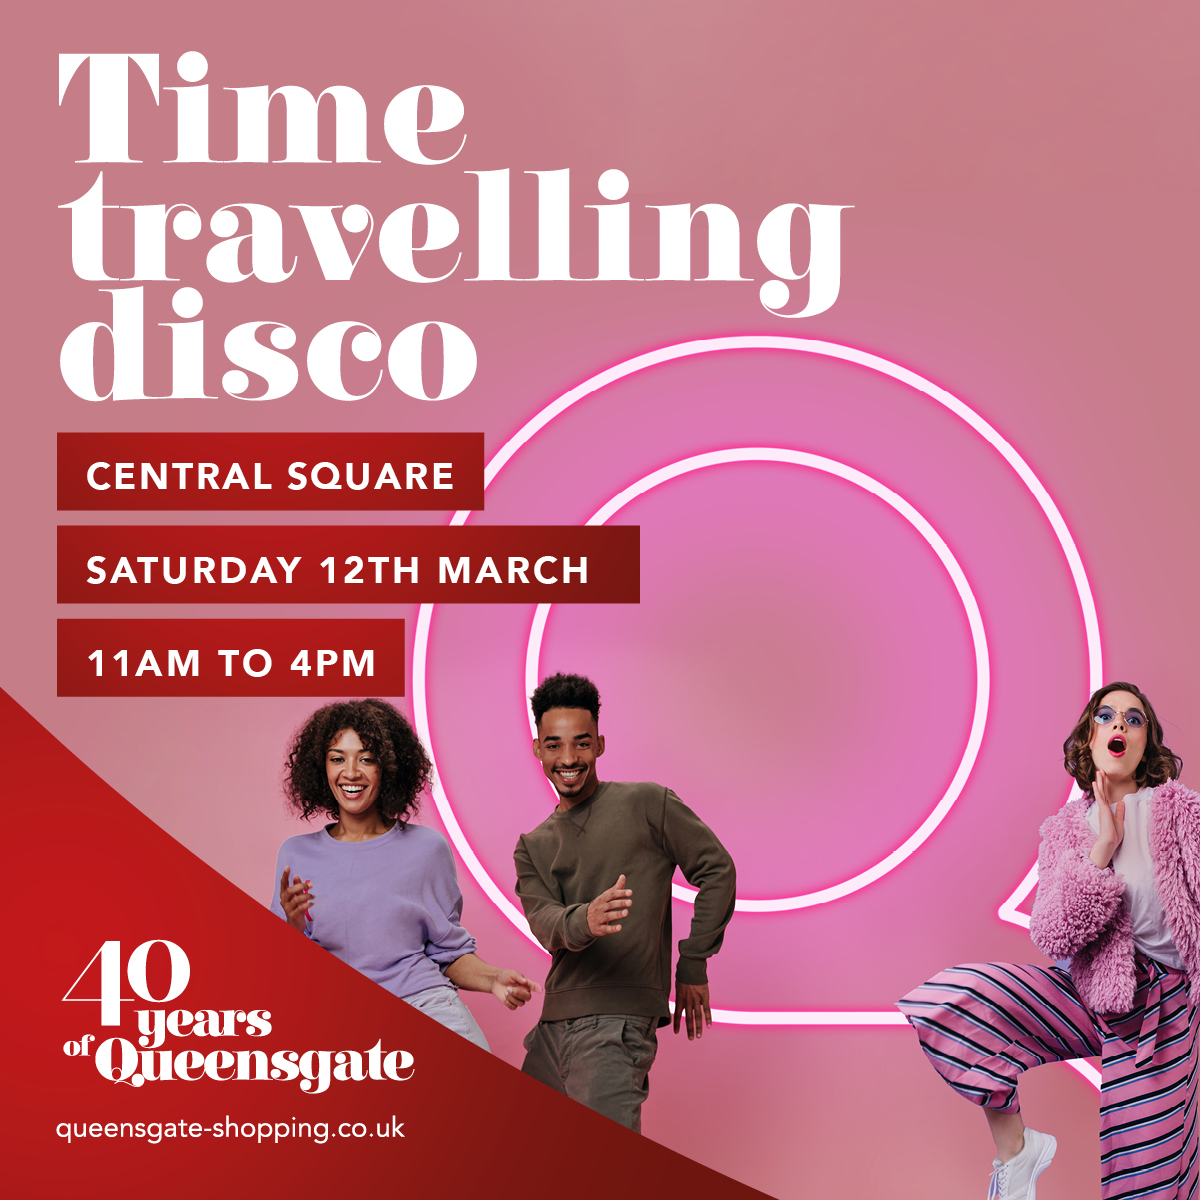 This week we have lots of exciting activities going on in the shopping centre in celebration of Queensgate turning 40 on the 9th March! 🥳 Find the events that will be on this week below, starting this Wed 9th March with FREE cupcakes & our 40 Years of Queensgate exhibition.